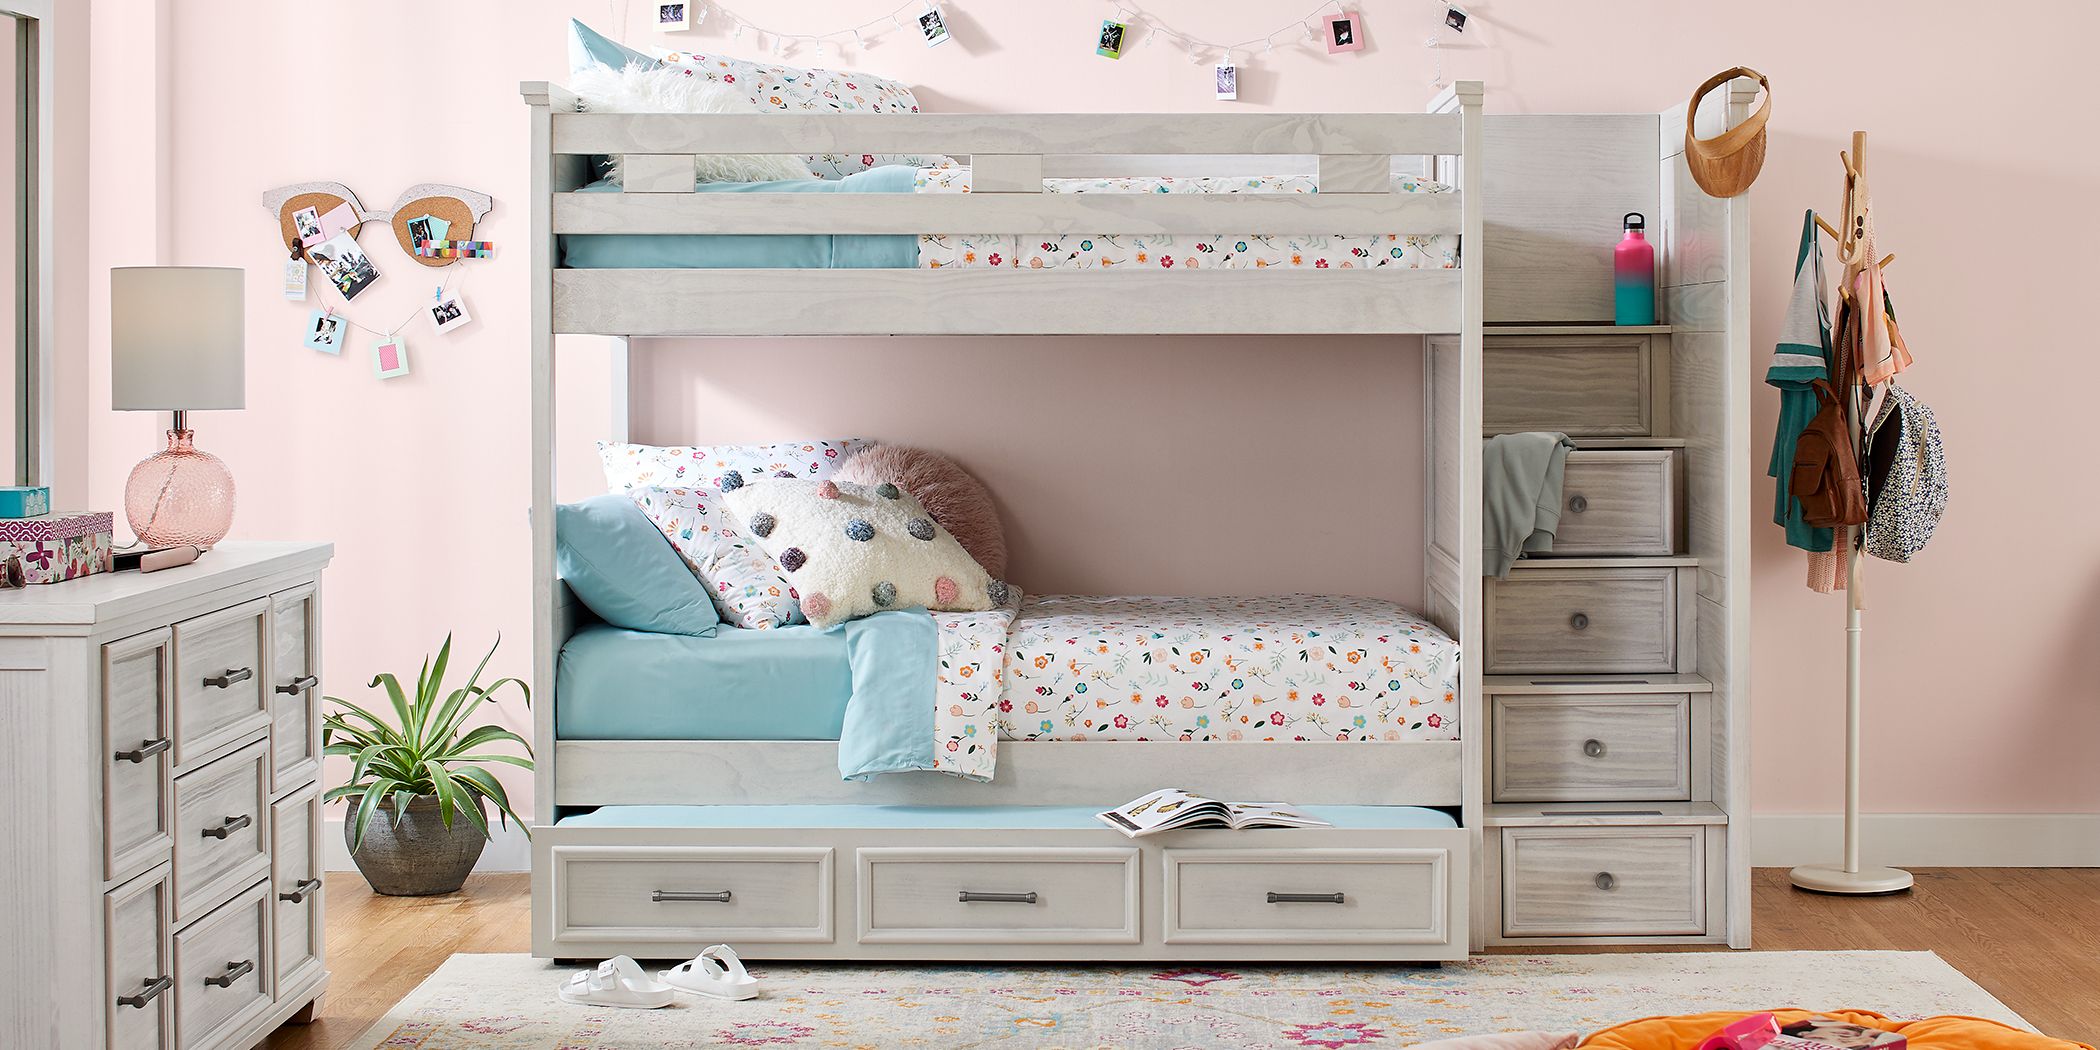 Bunk Beds With Storage Space, Kids Bunk Beds With Storage